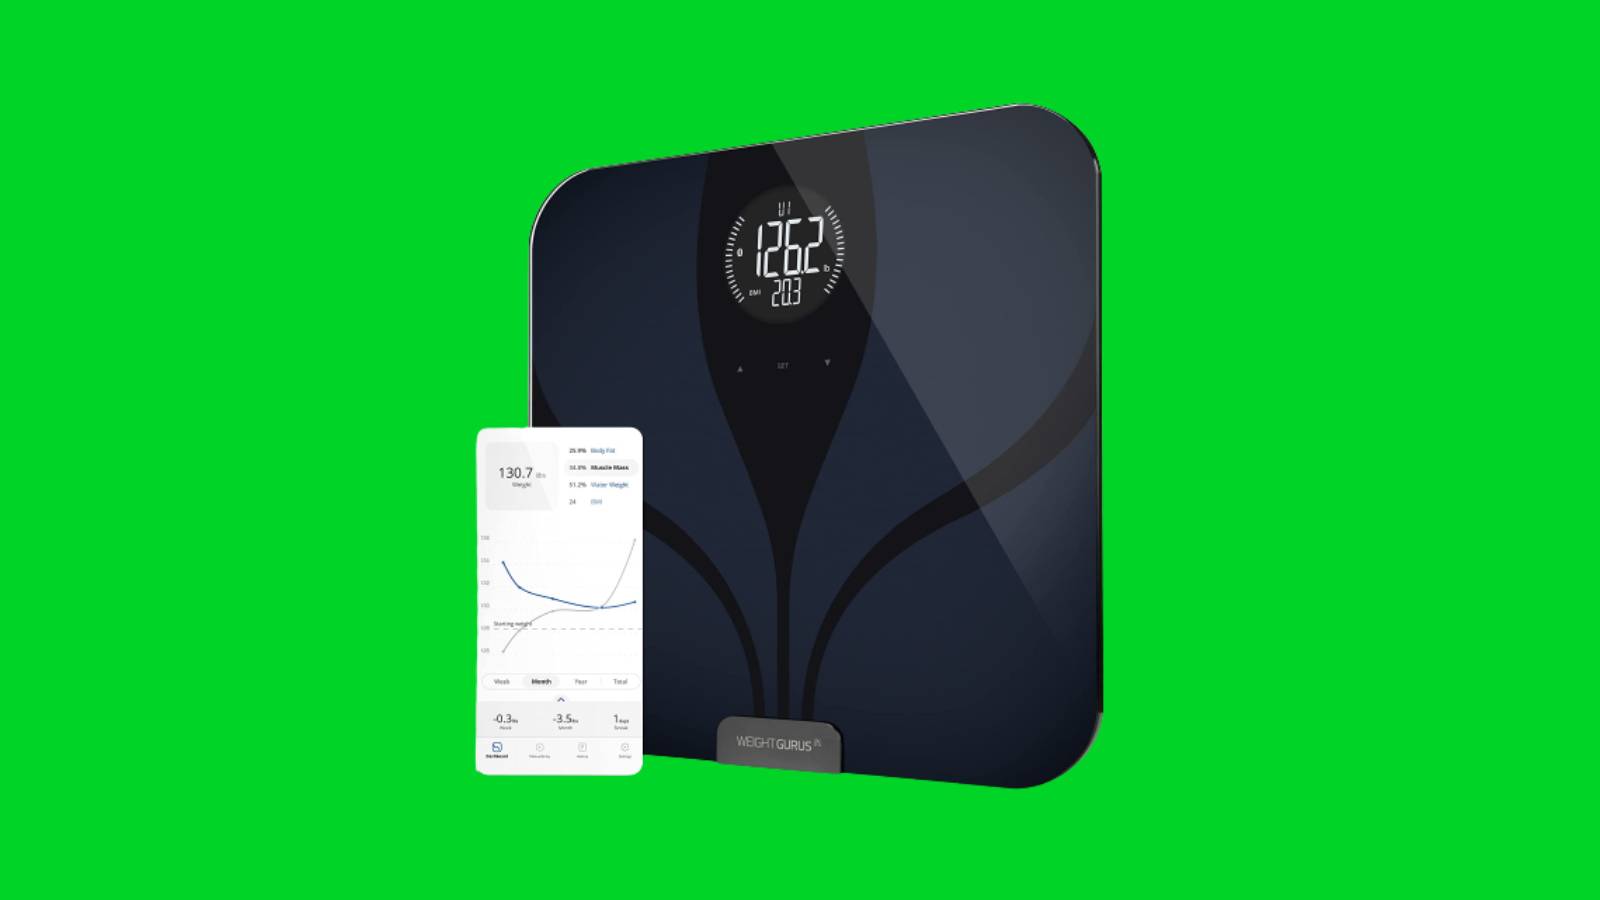 Etekcity Scale for Body Weight FSA HSA Store Eligible, Smart Bathroom  Digital Weighing Machine for Fat BMI Muscle Composition, Accurate Bluetooth  Home